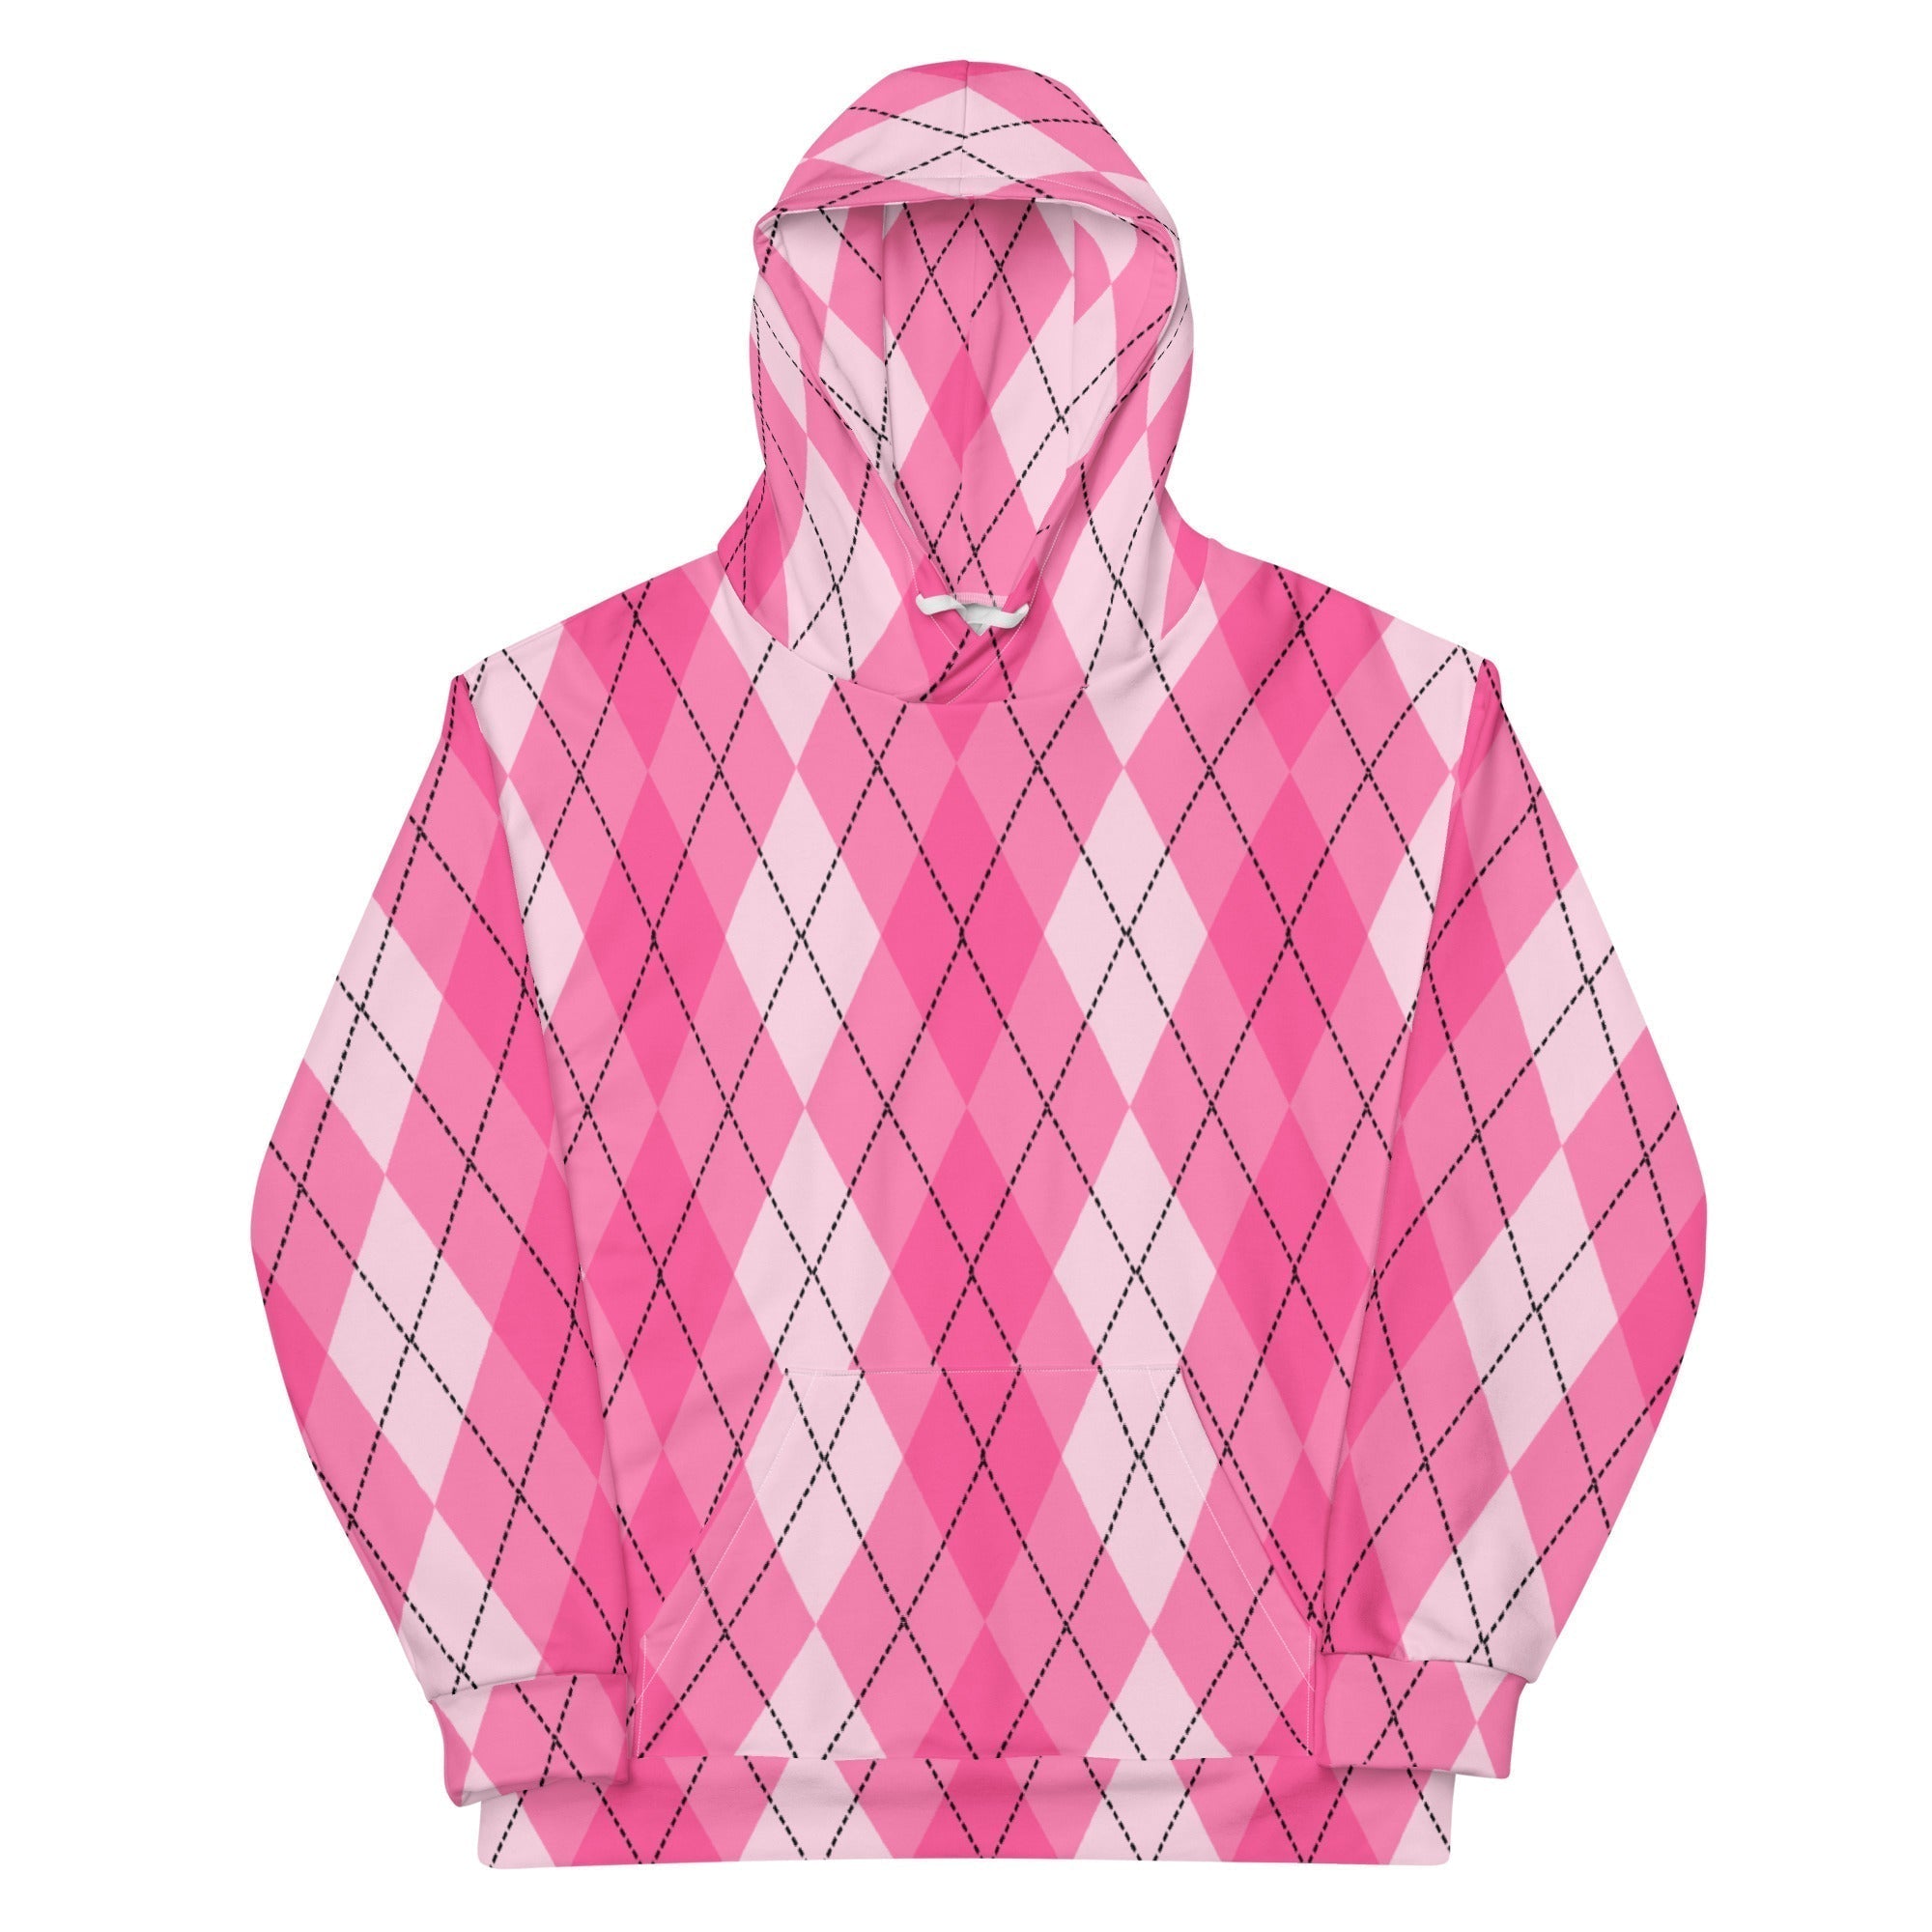 Unisex All-Over Print Hoodie - Pink Argyle - GRAPHIC T-SHIRTS